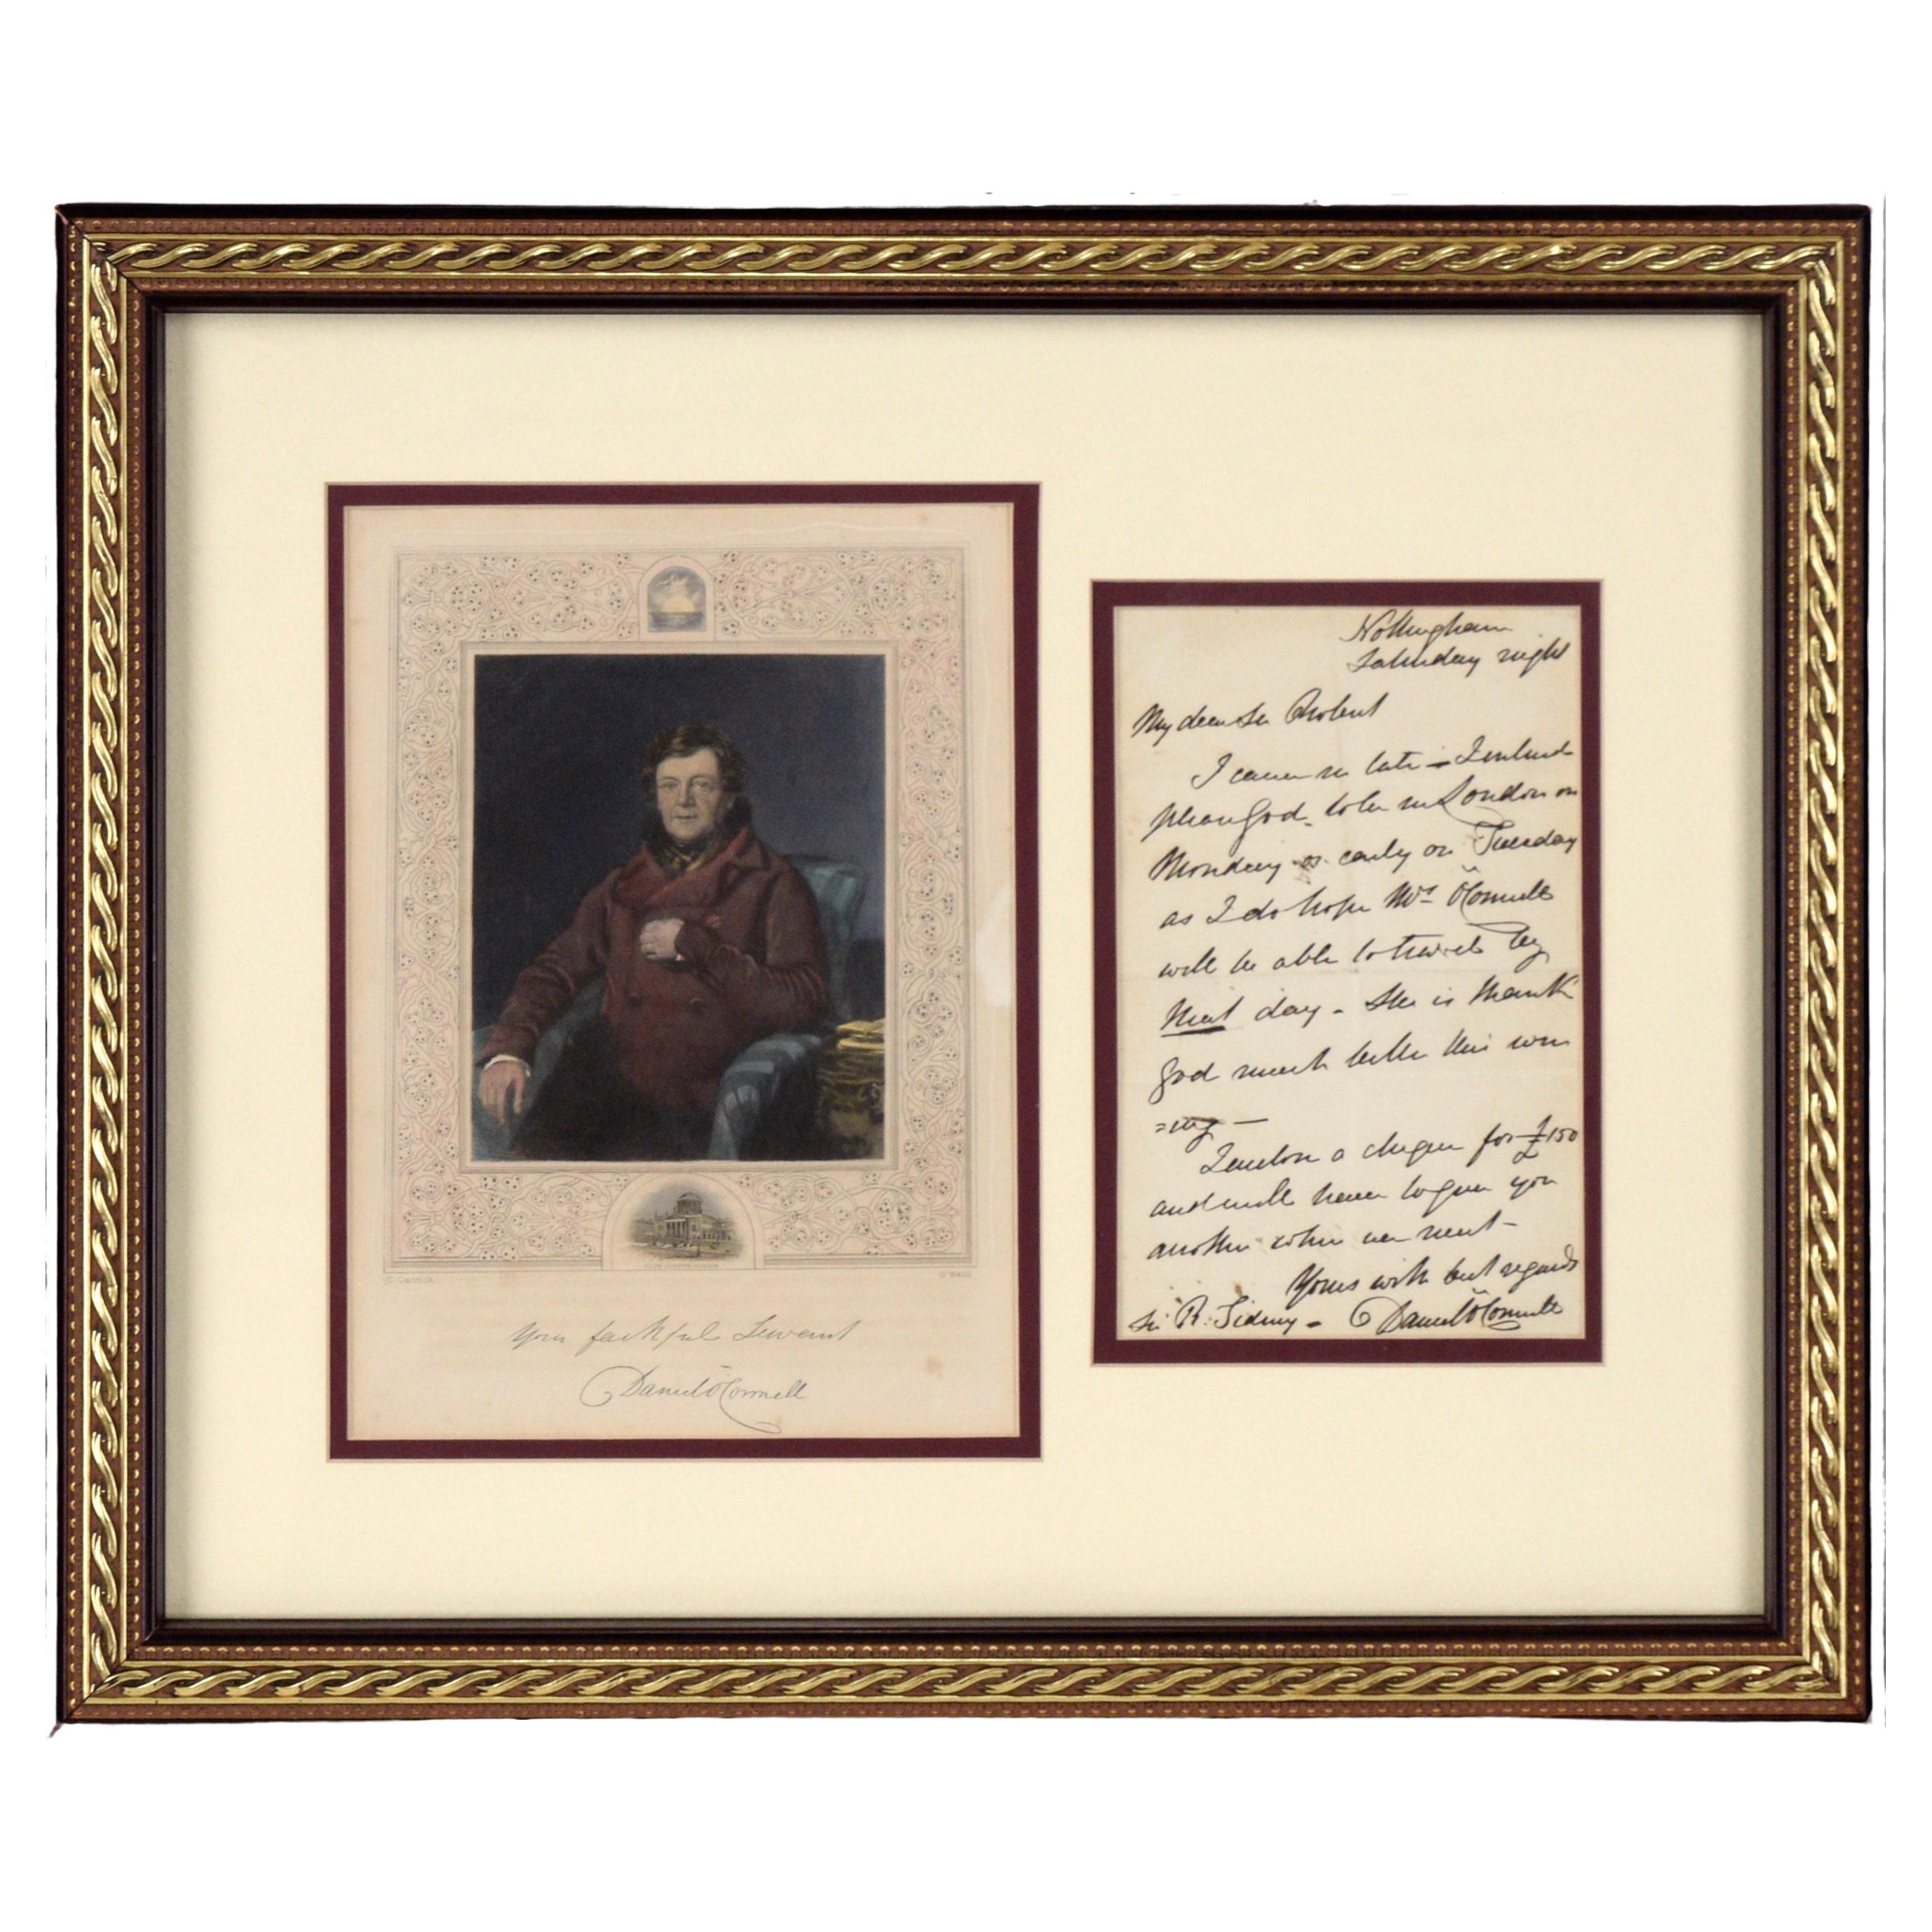 Hand Written Letter from Daniel O'Connell, with Portrait Engraving by O'Neil For Sale